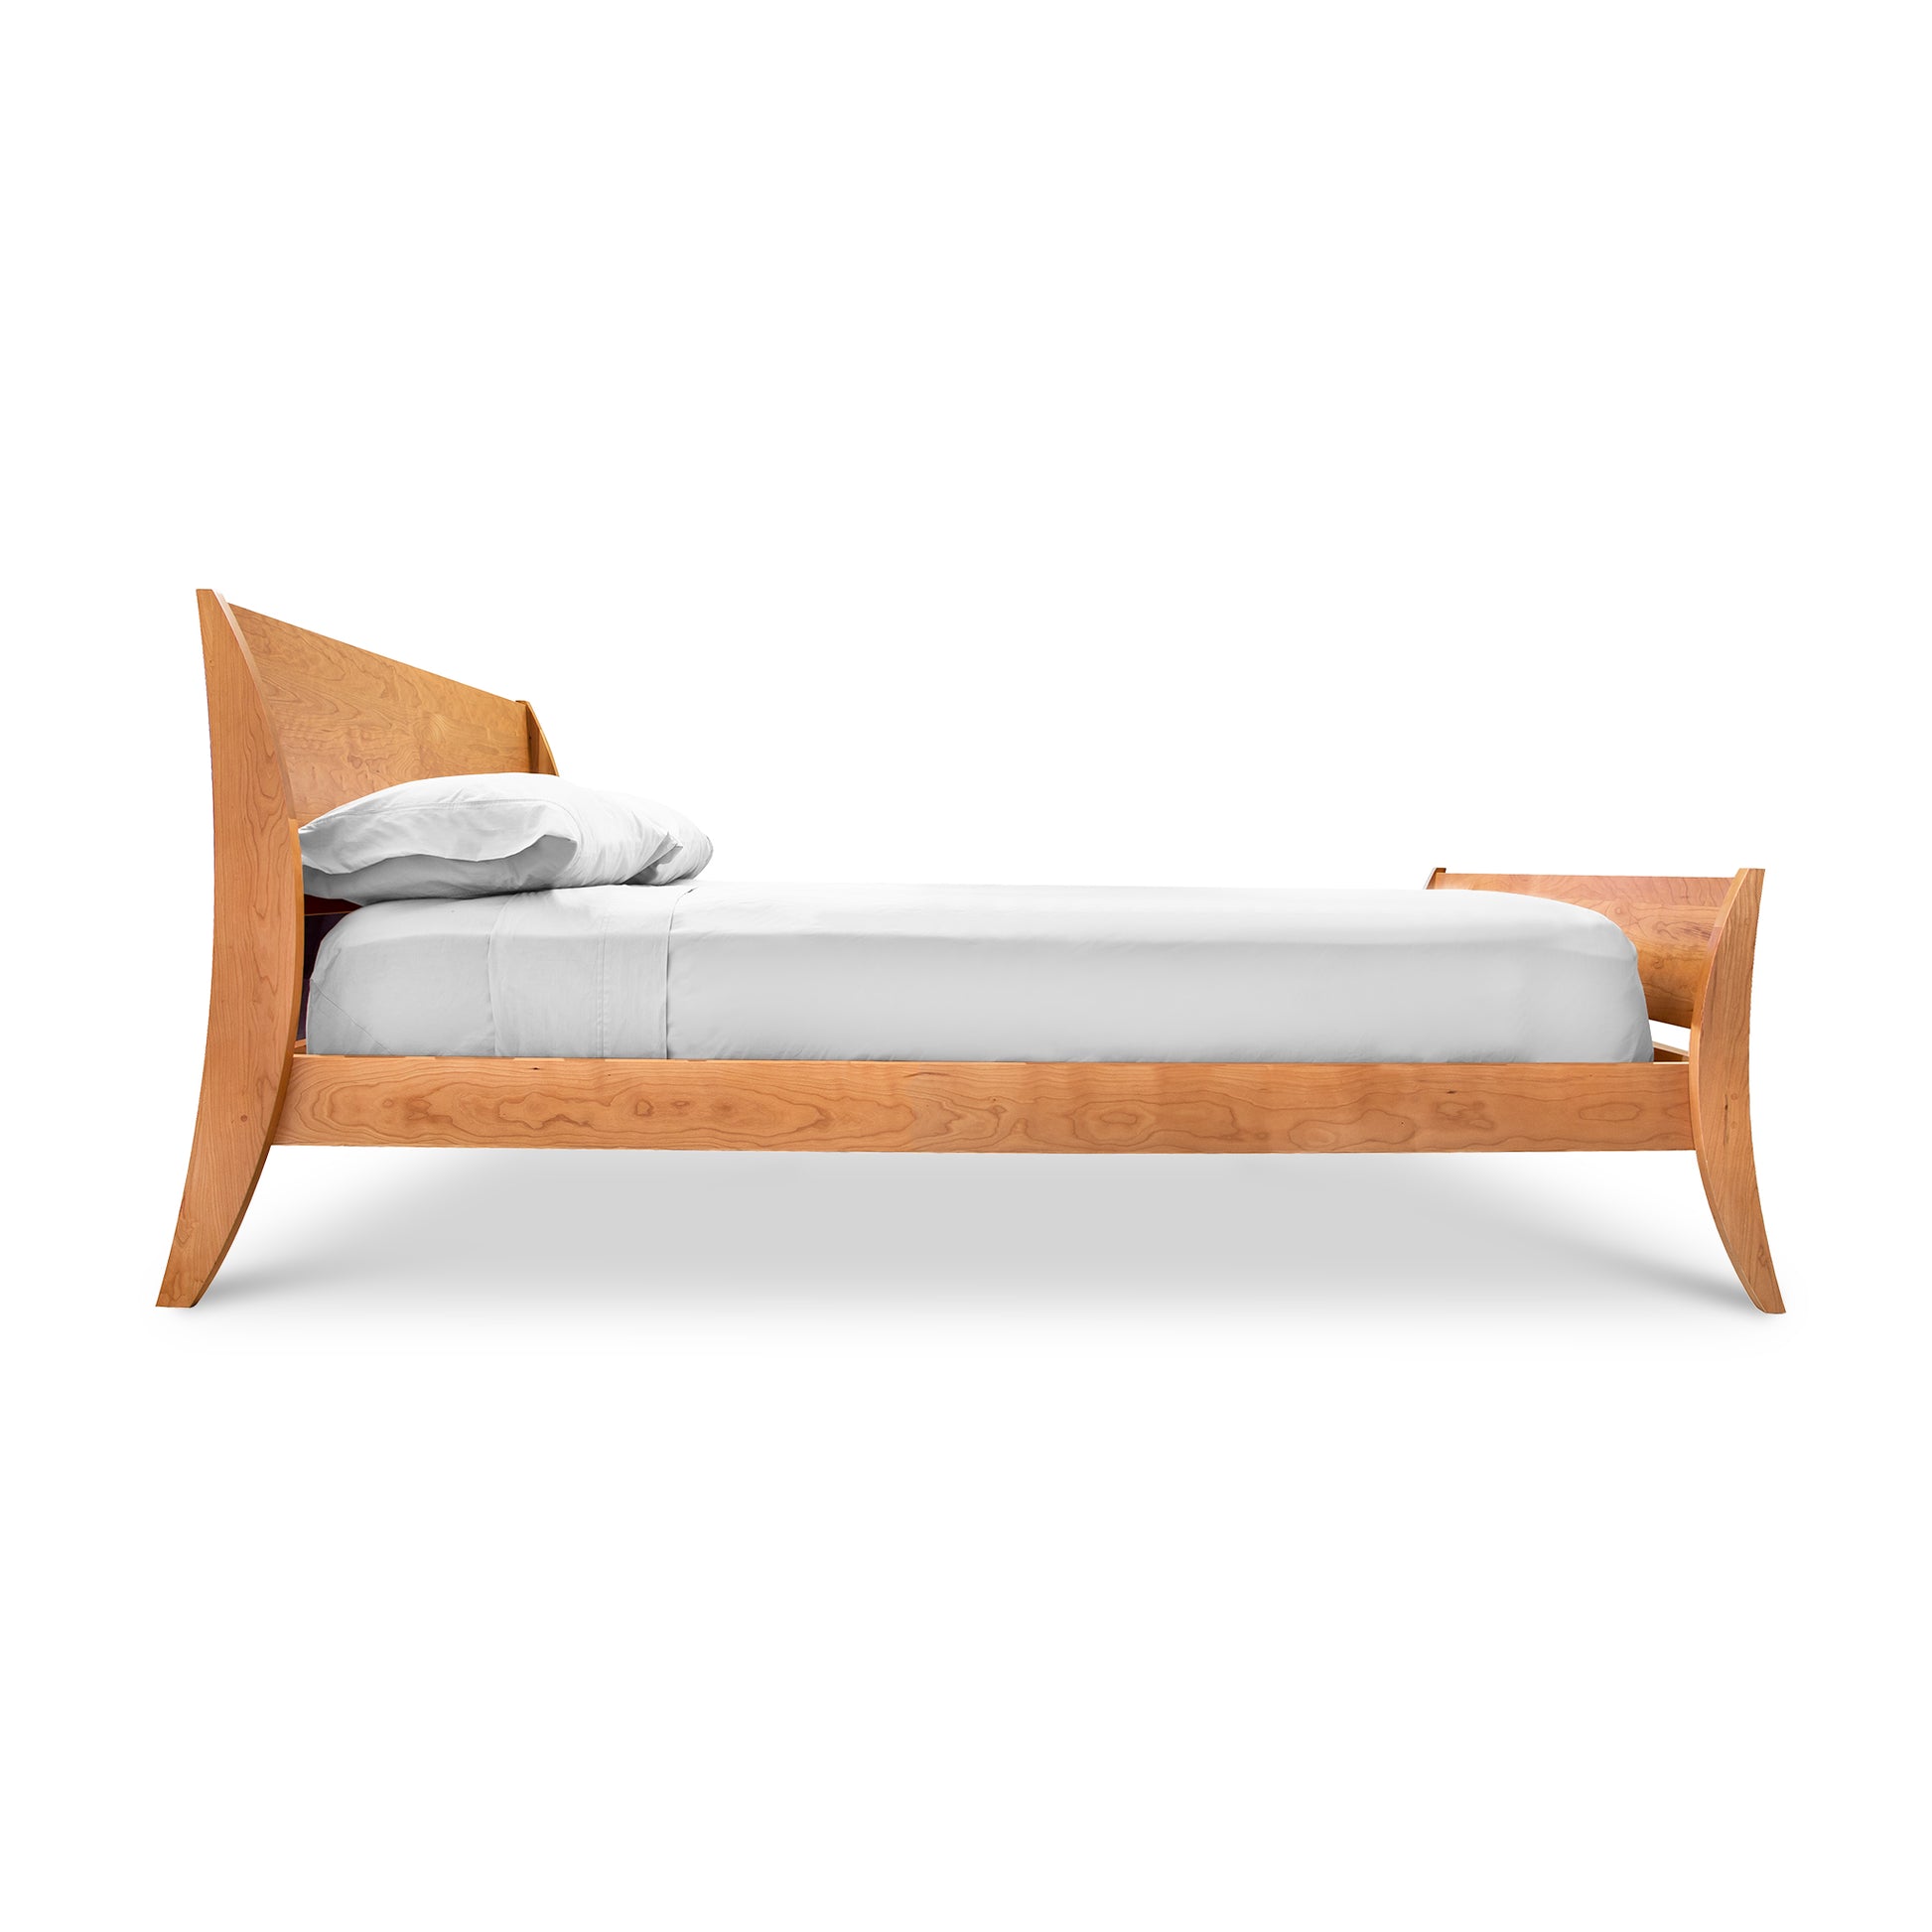 The Lyndon Furniture Holland Sleigh Bed is an elegant bedroom centerpiece with a contemporary twist. It features a bed frame made of wood, including a wooden headboard and footboard.